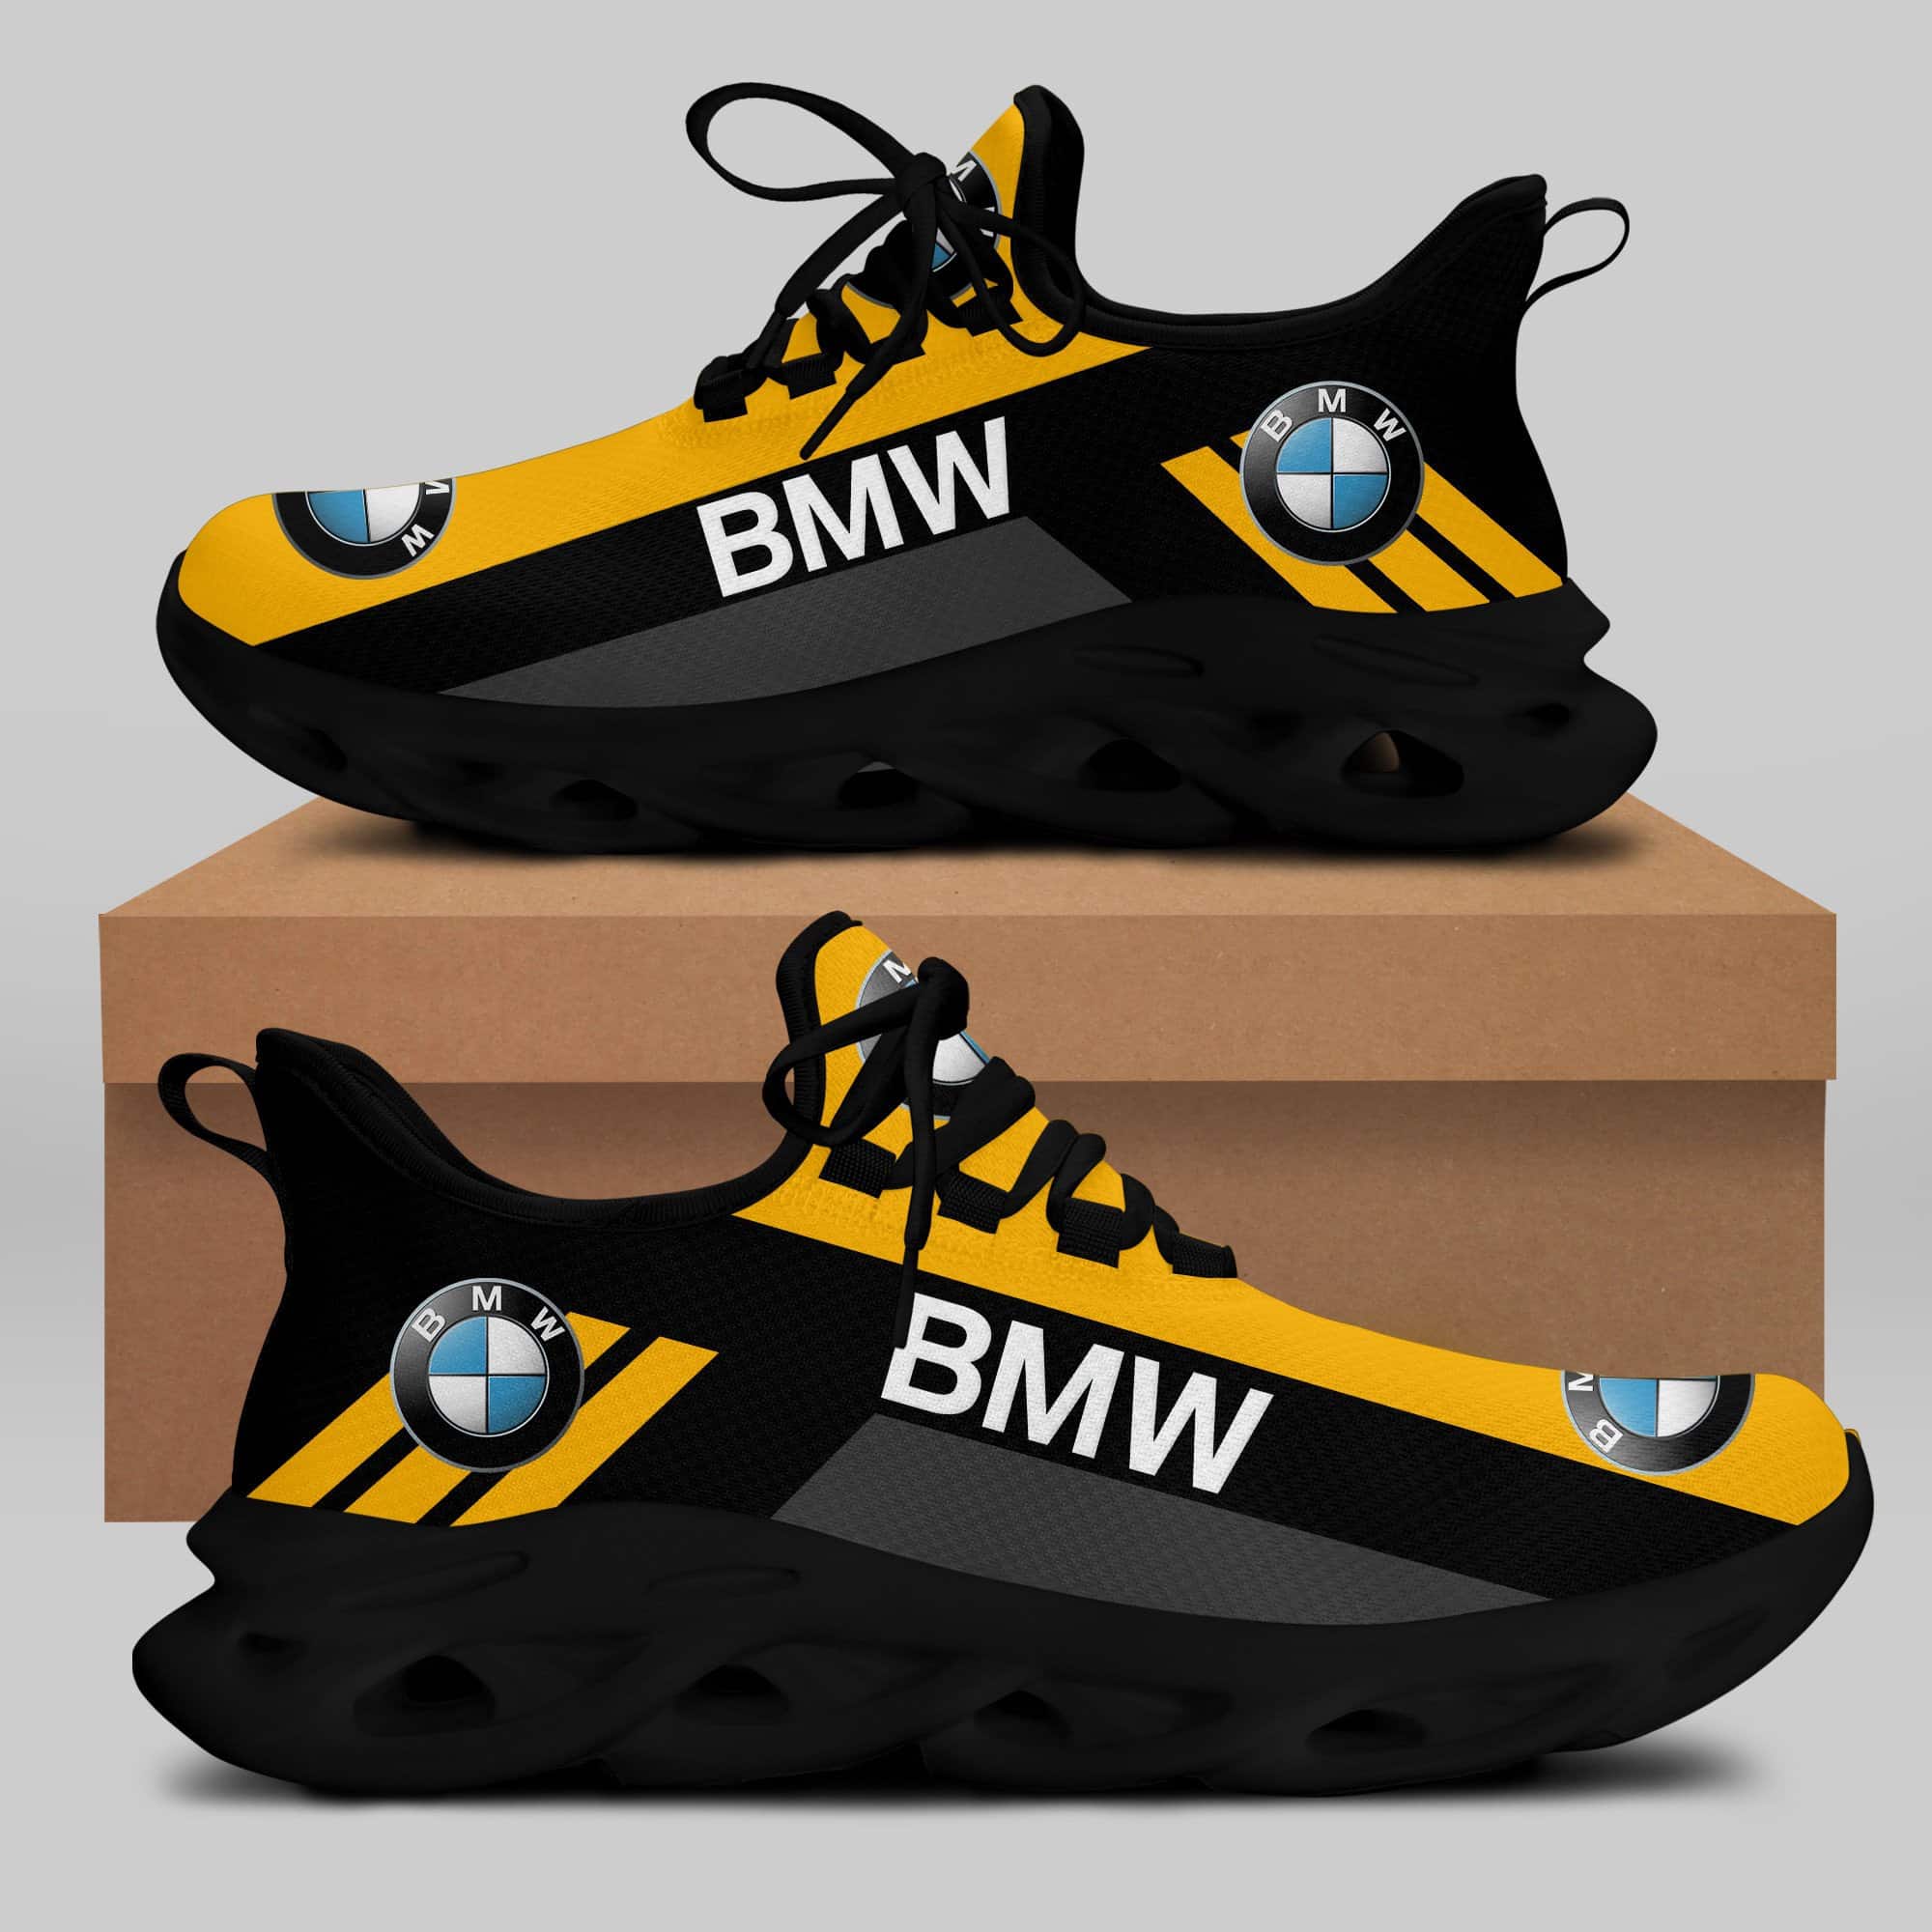 Bmw Running Shoes Max Soul Shoes Sneakers Ver 22 1